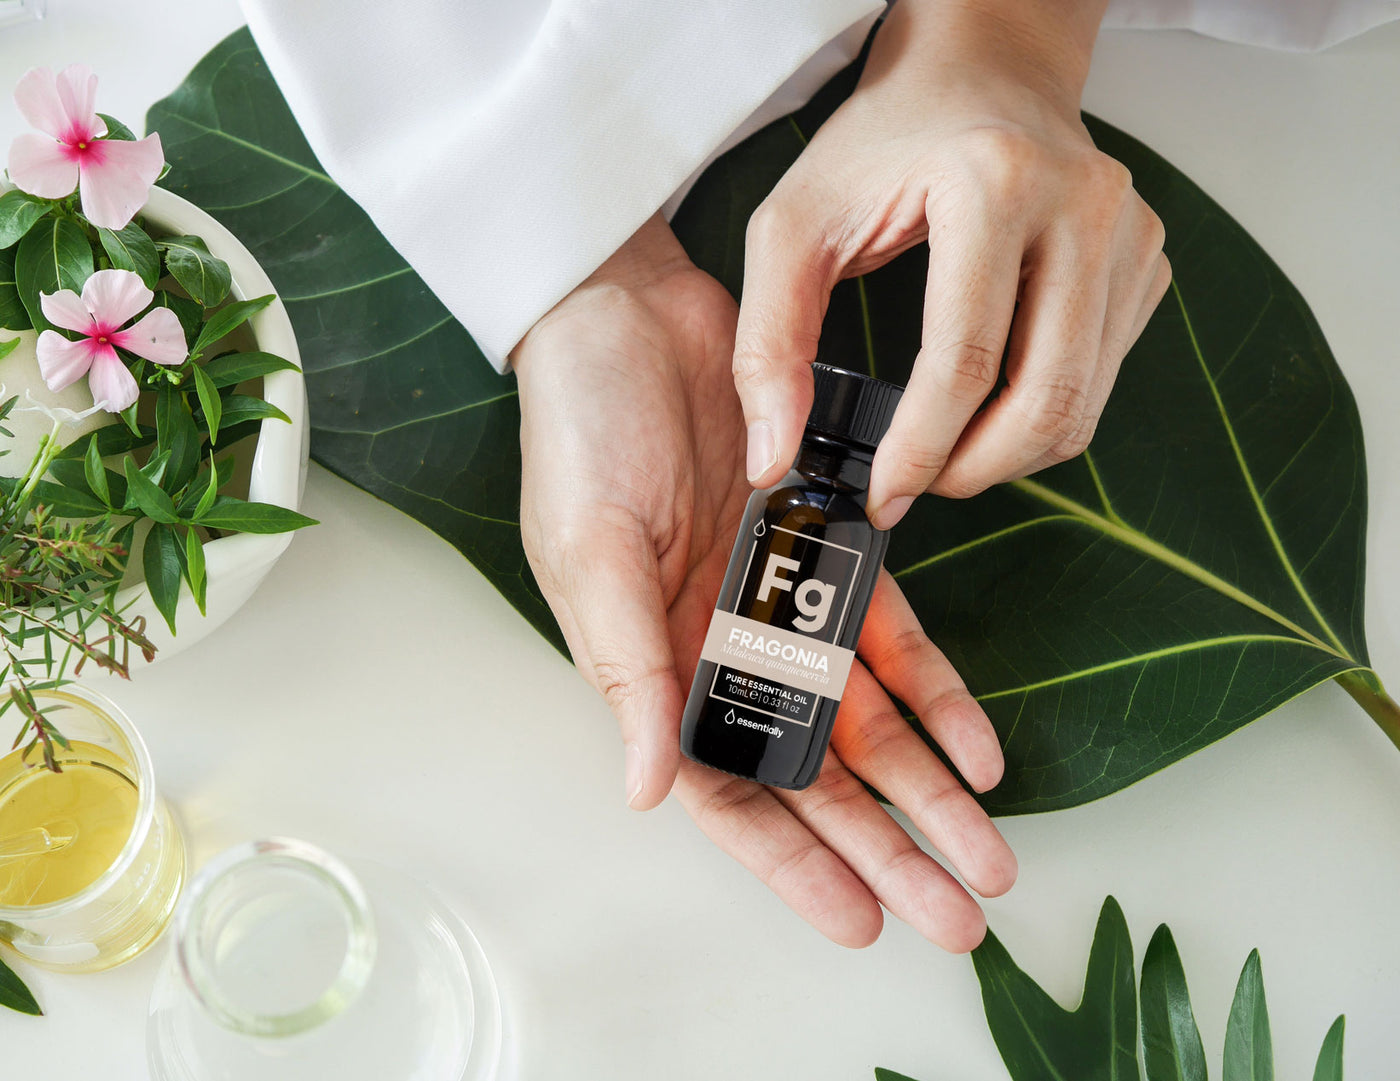 5 impressively simple steps to make your home smell heavenly with essential oils